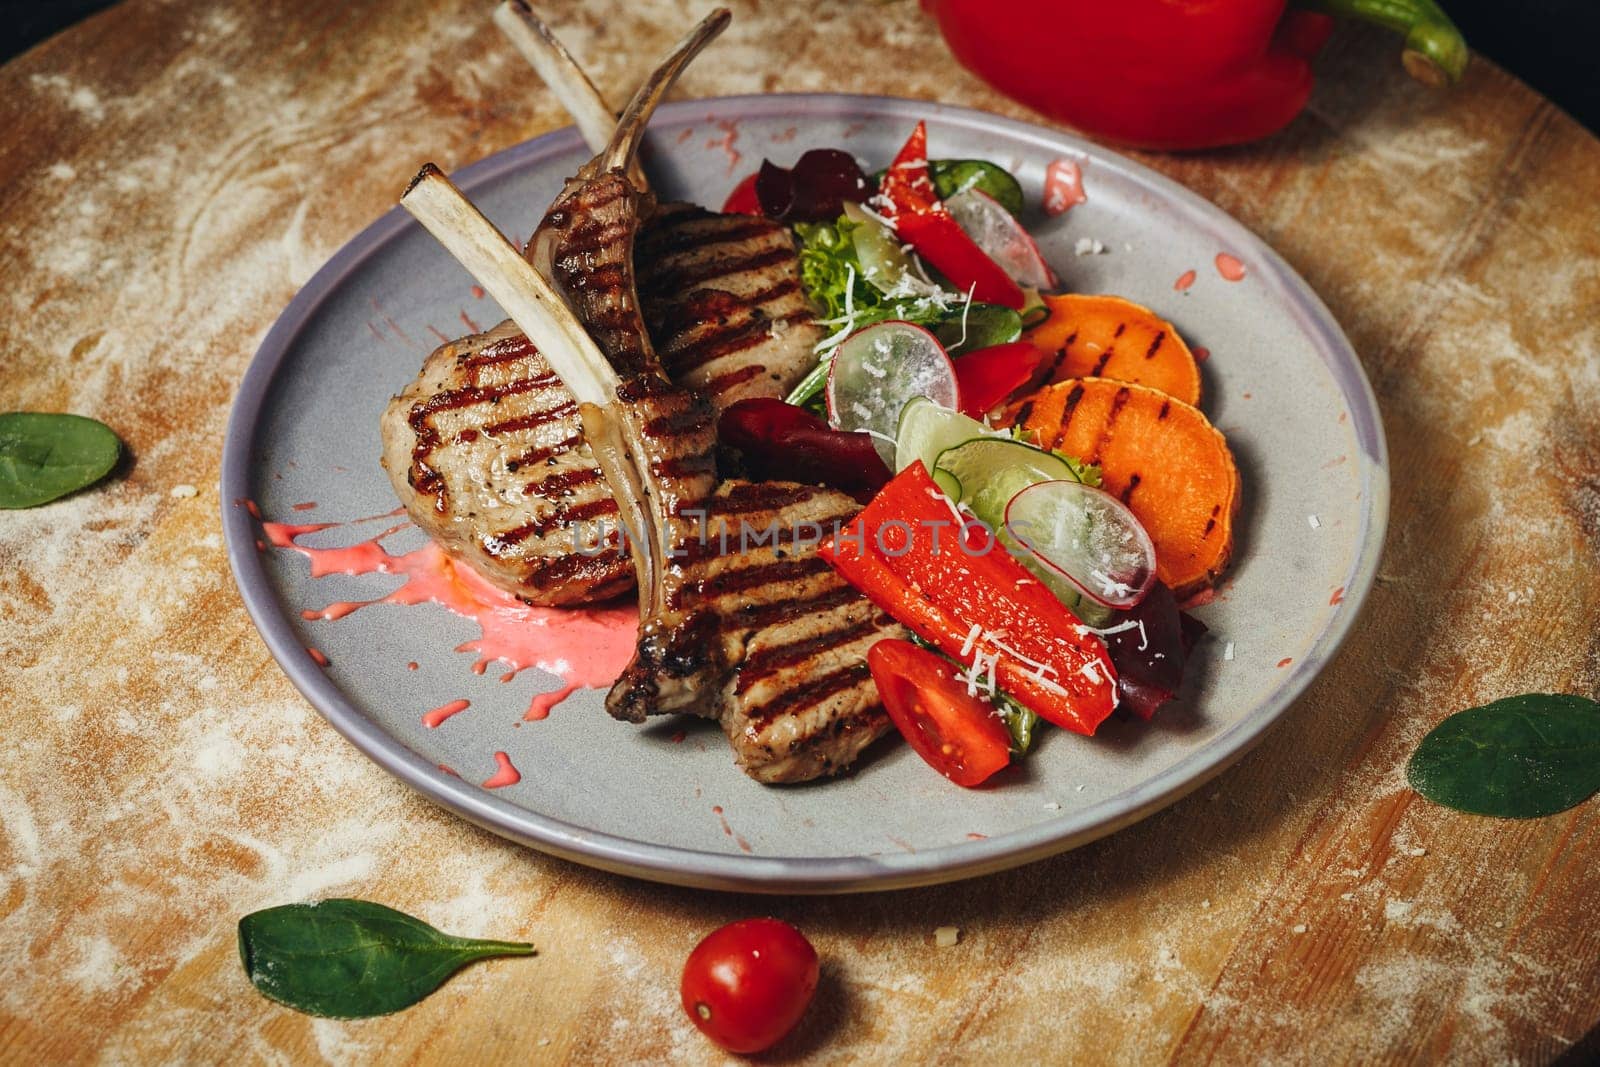 Sizzling Lamb Delight,Succulent grilled lamb chops by Miron